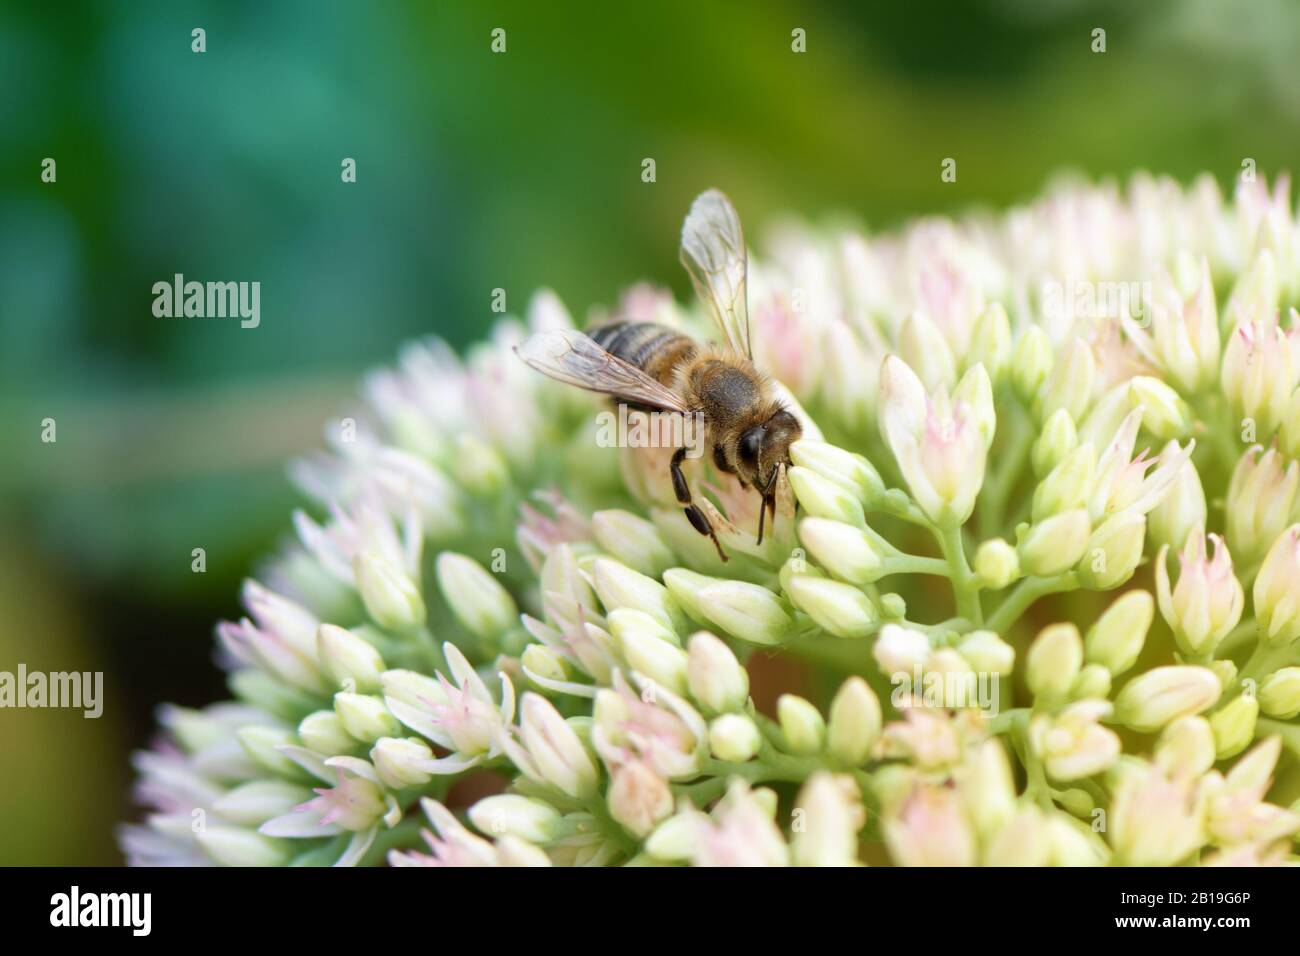 Honey bee collecting pollen from a blooming flower Stock Photo